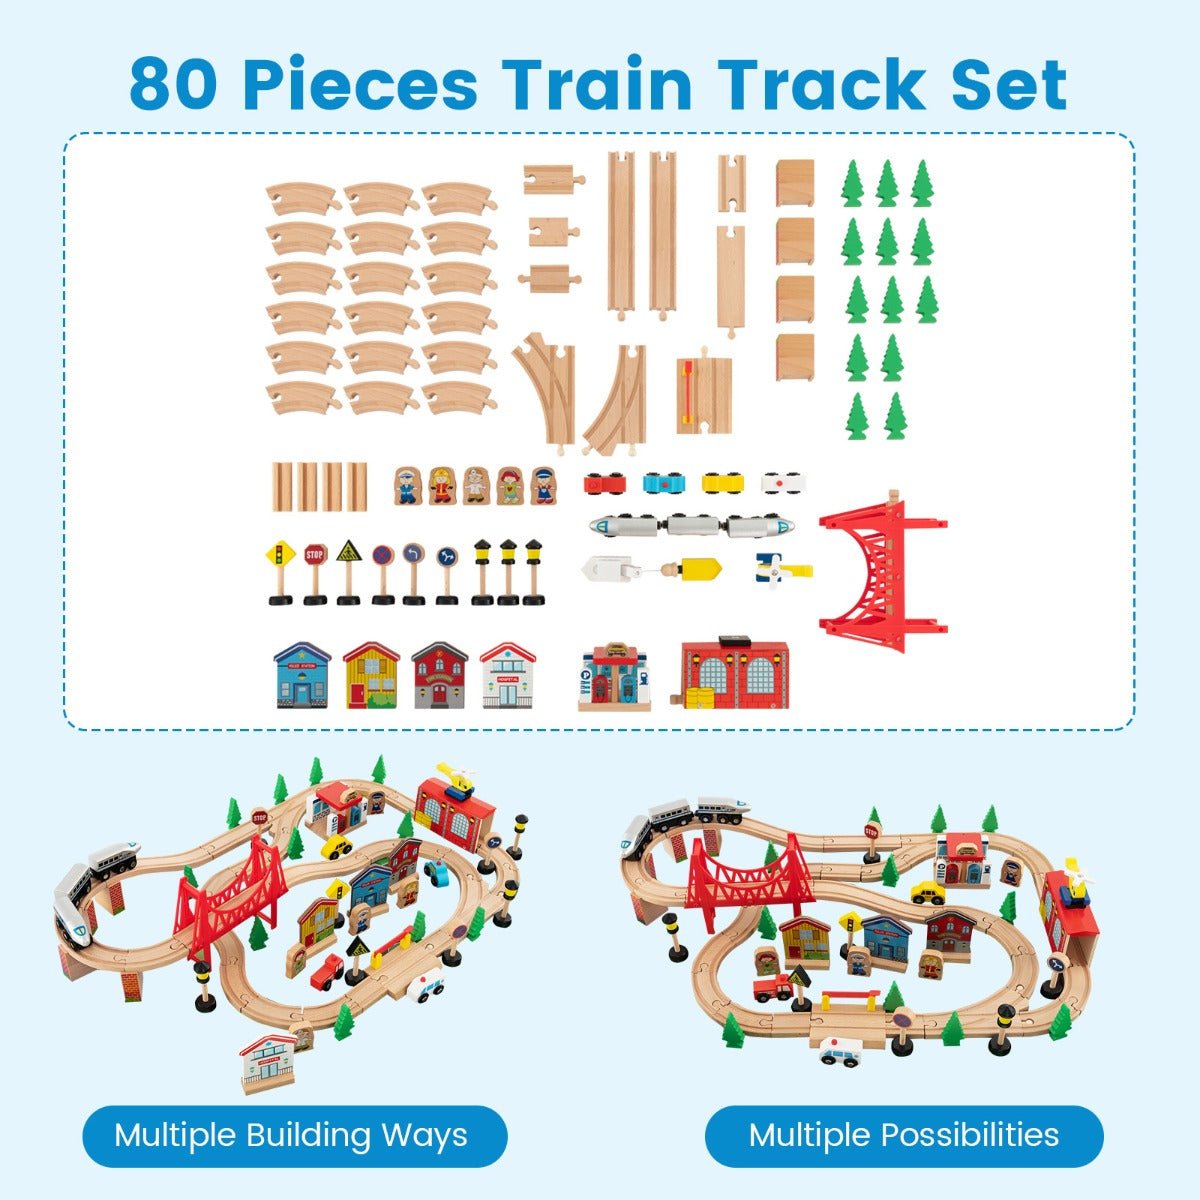 Kids’ Imaginative Play Train Set with Blue Tabletop